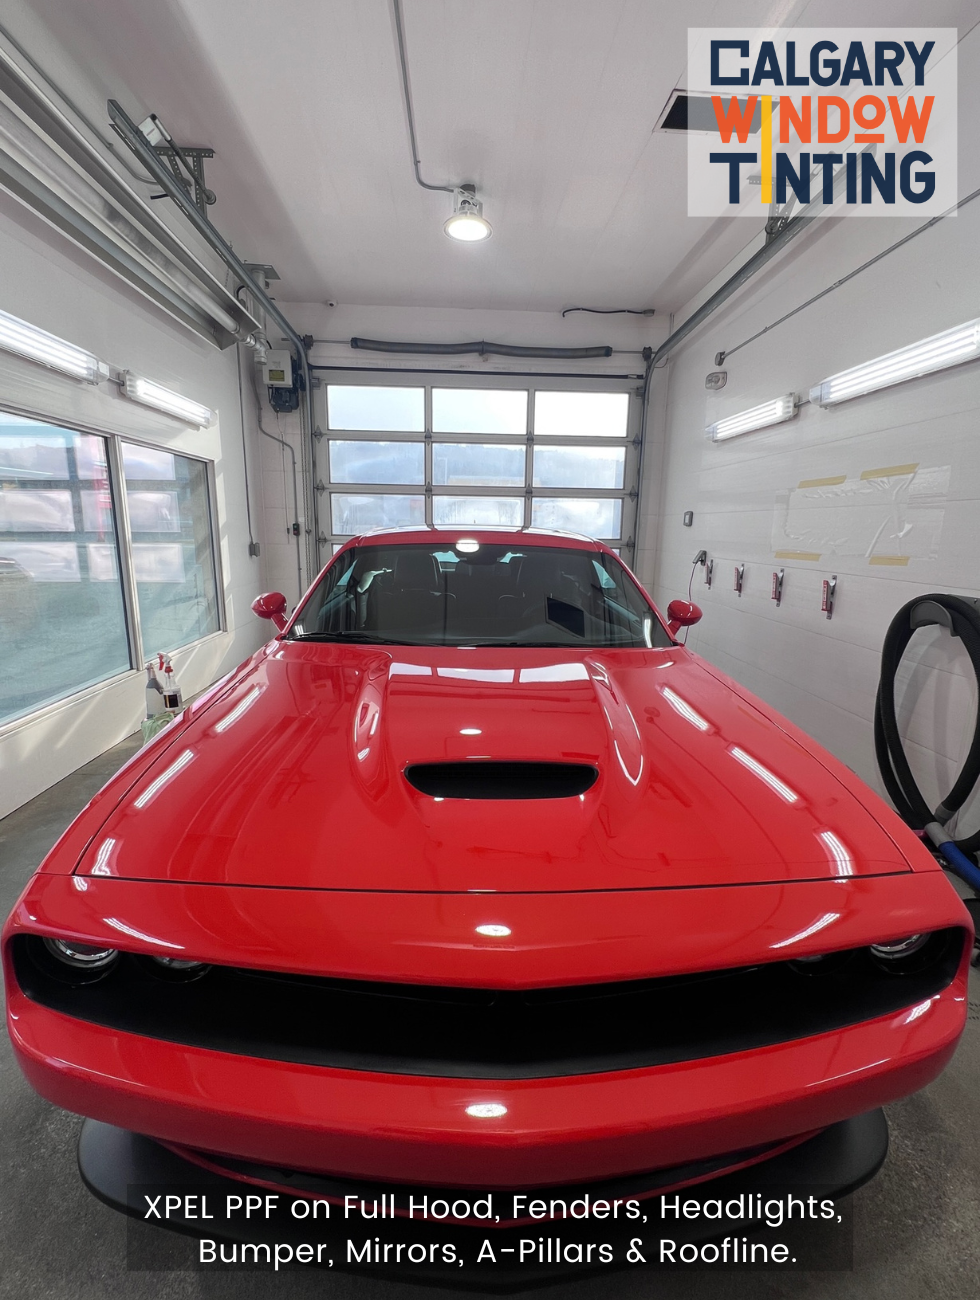 XPEL paint protection film on Dodge Challenger.